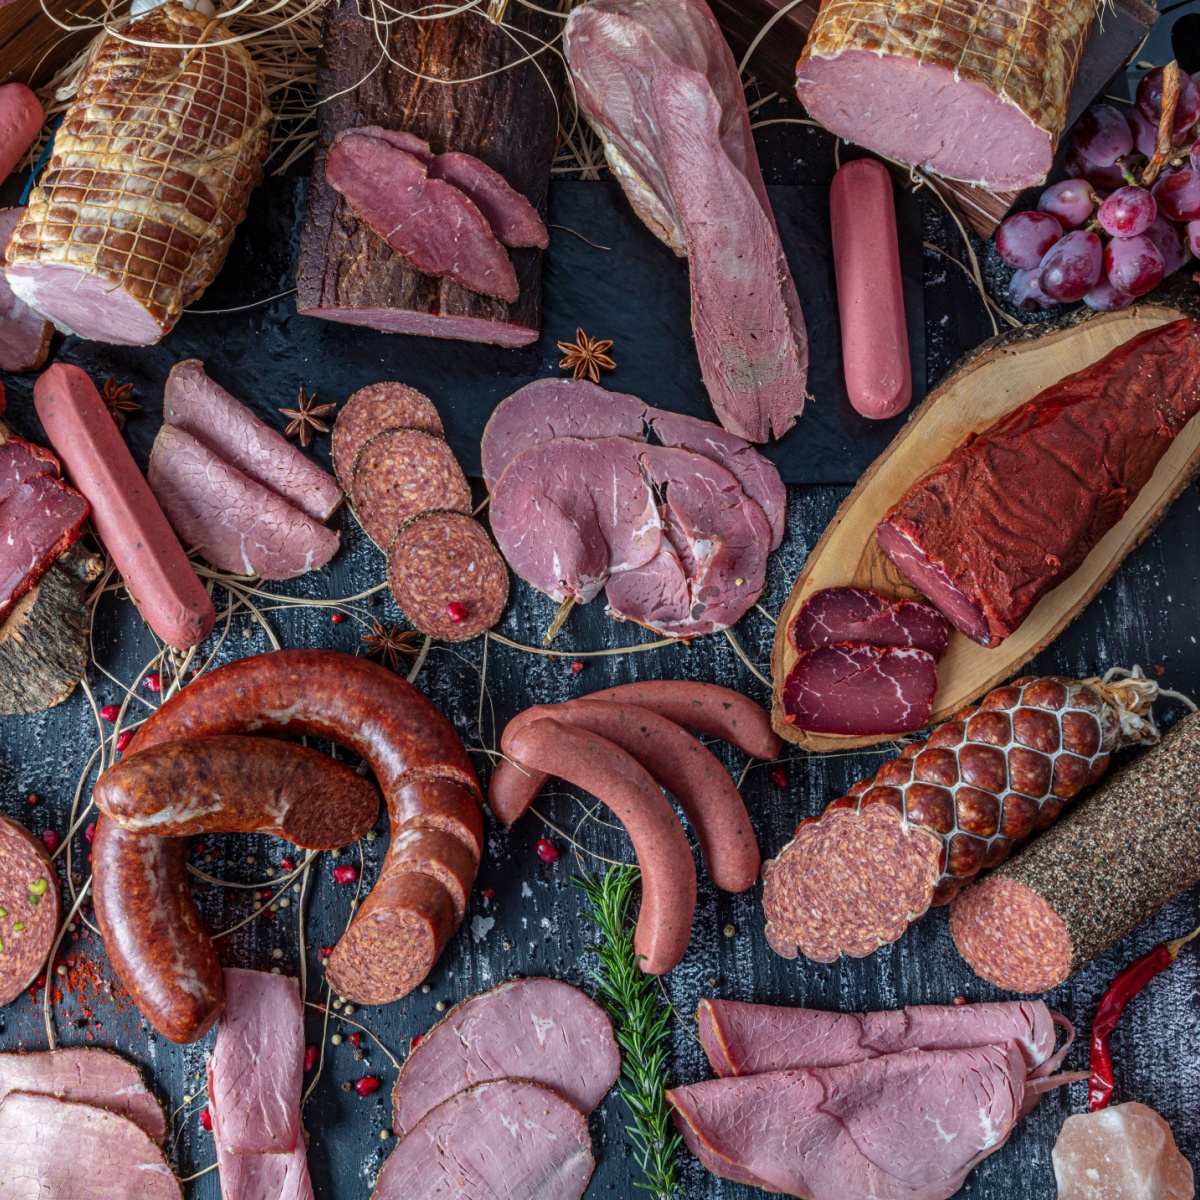 sausages and various meats